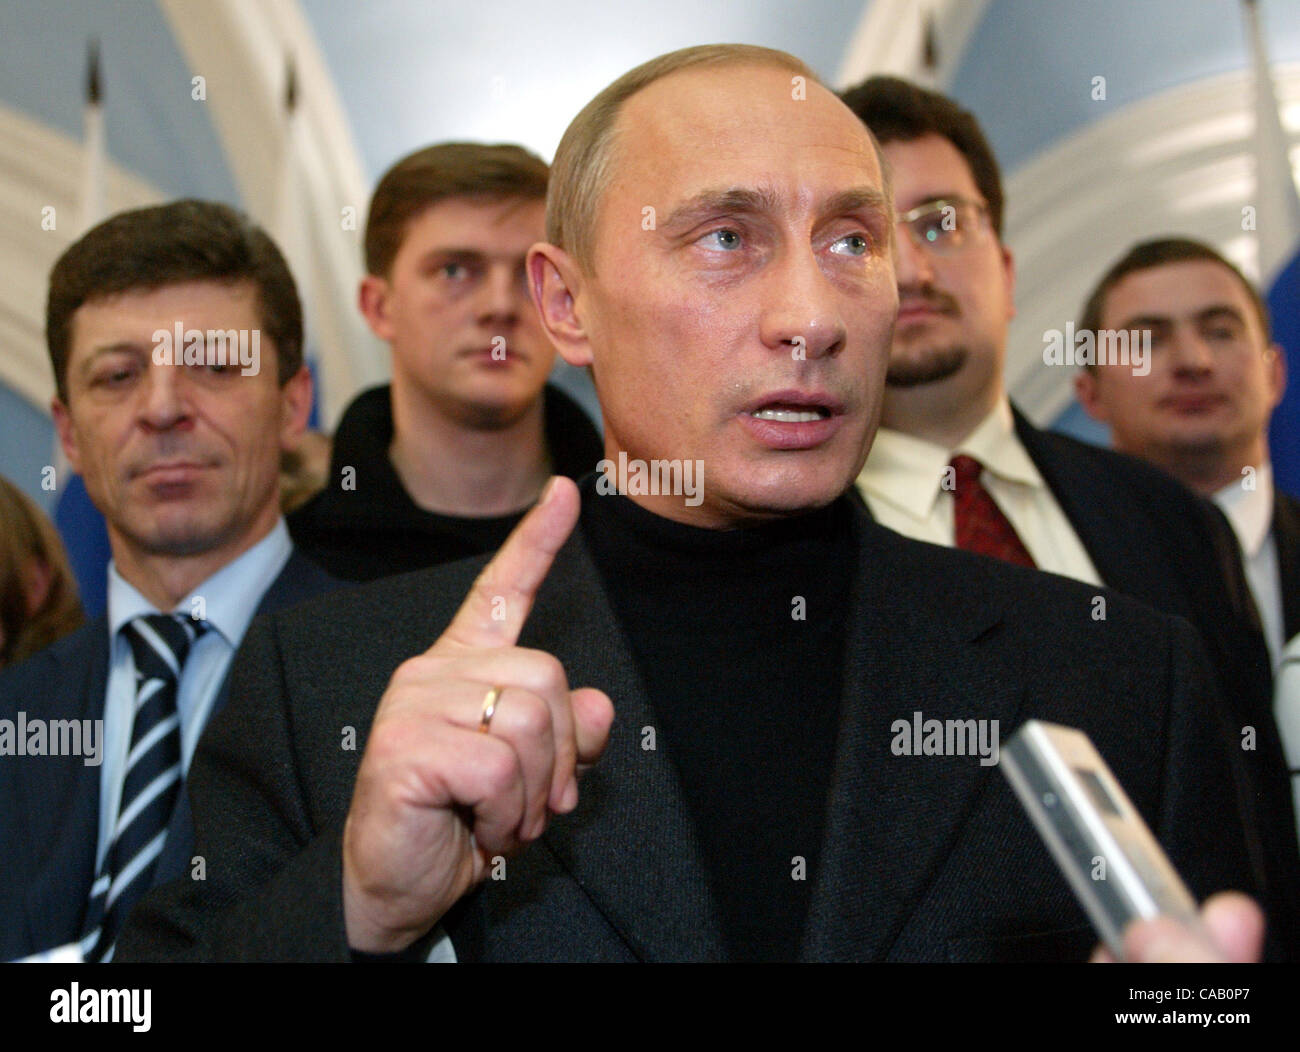 The president of Russia Vladimir Putin (on the right) and Dmitry Kozak in night of elections in an elective staff. (Credit Image: © PhotoXpress/ZUMA Press) RESTRICTIONS: North and South America Rights ONLY! Stock Photo